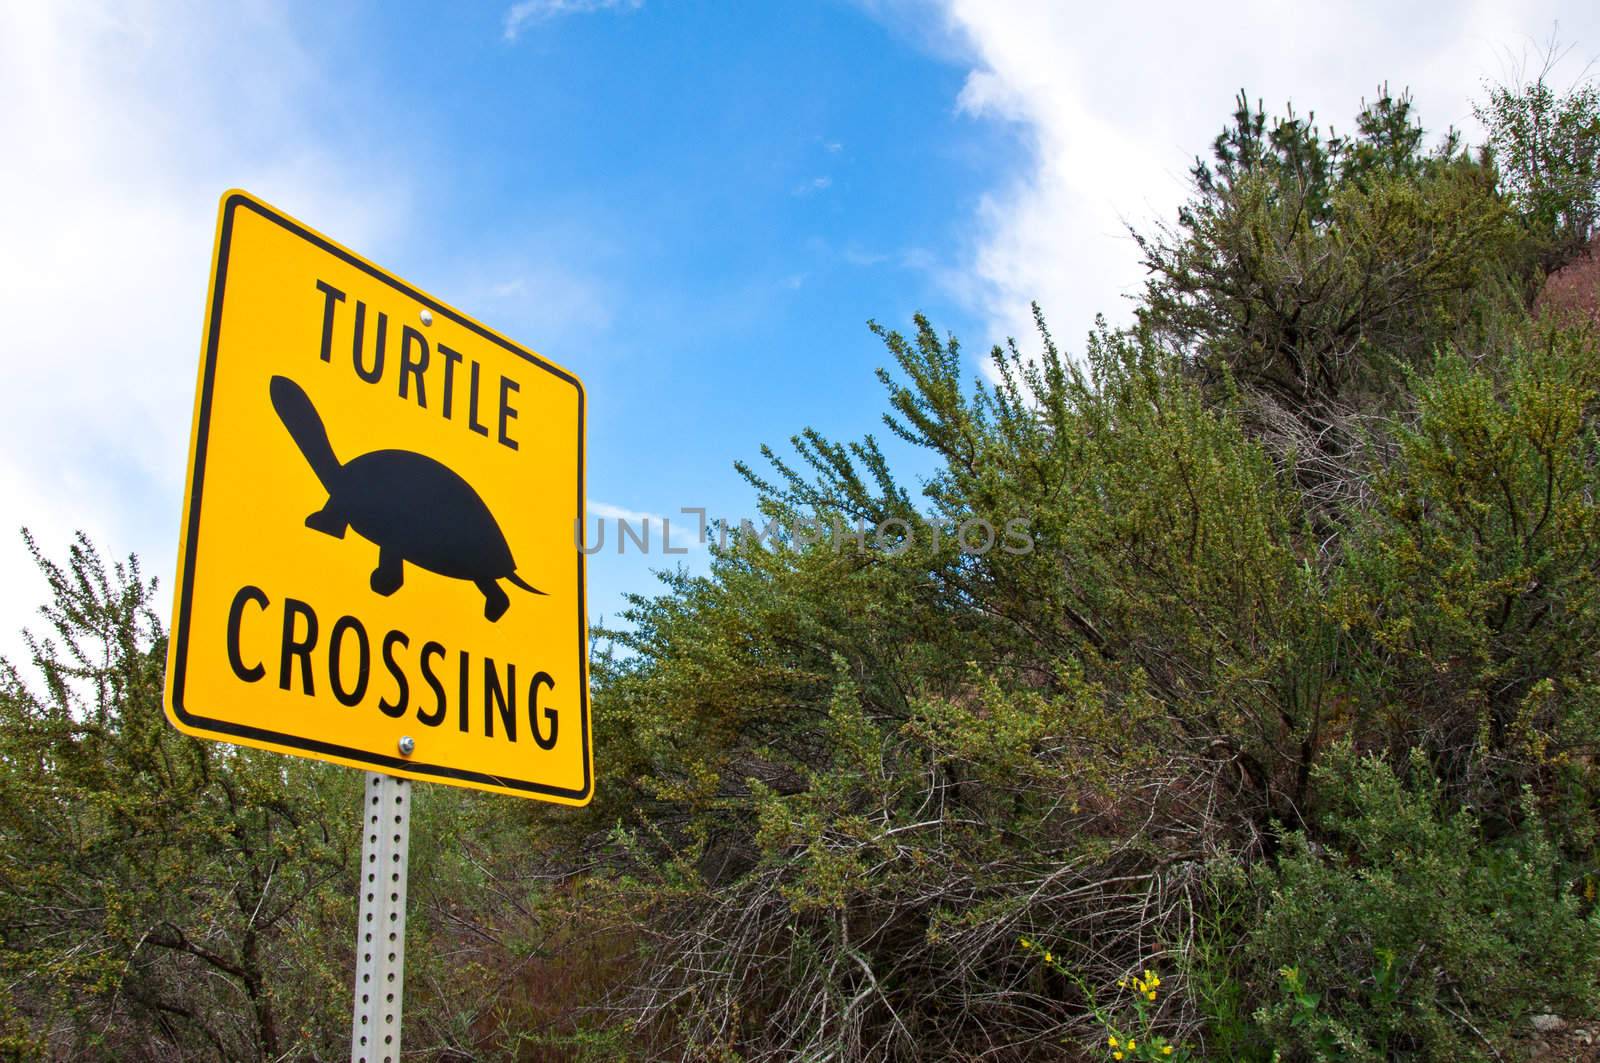 Unique turtle crossing sign by REBELProductions